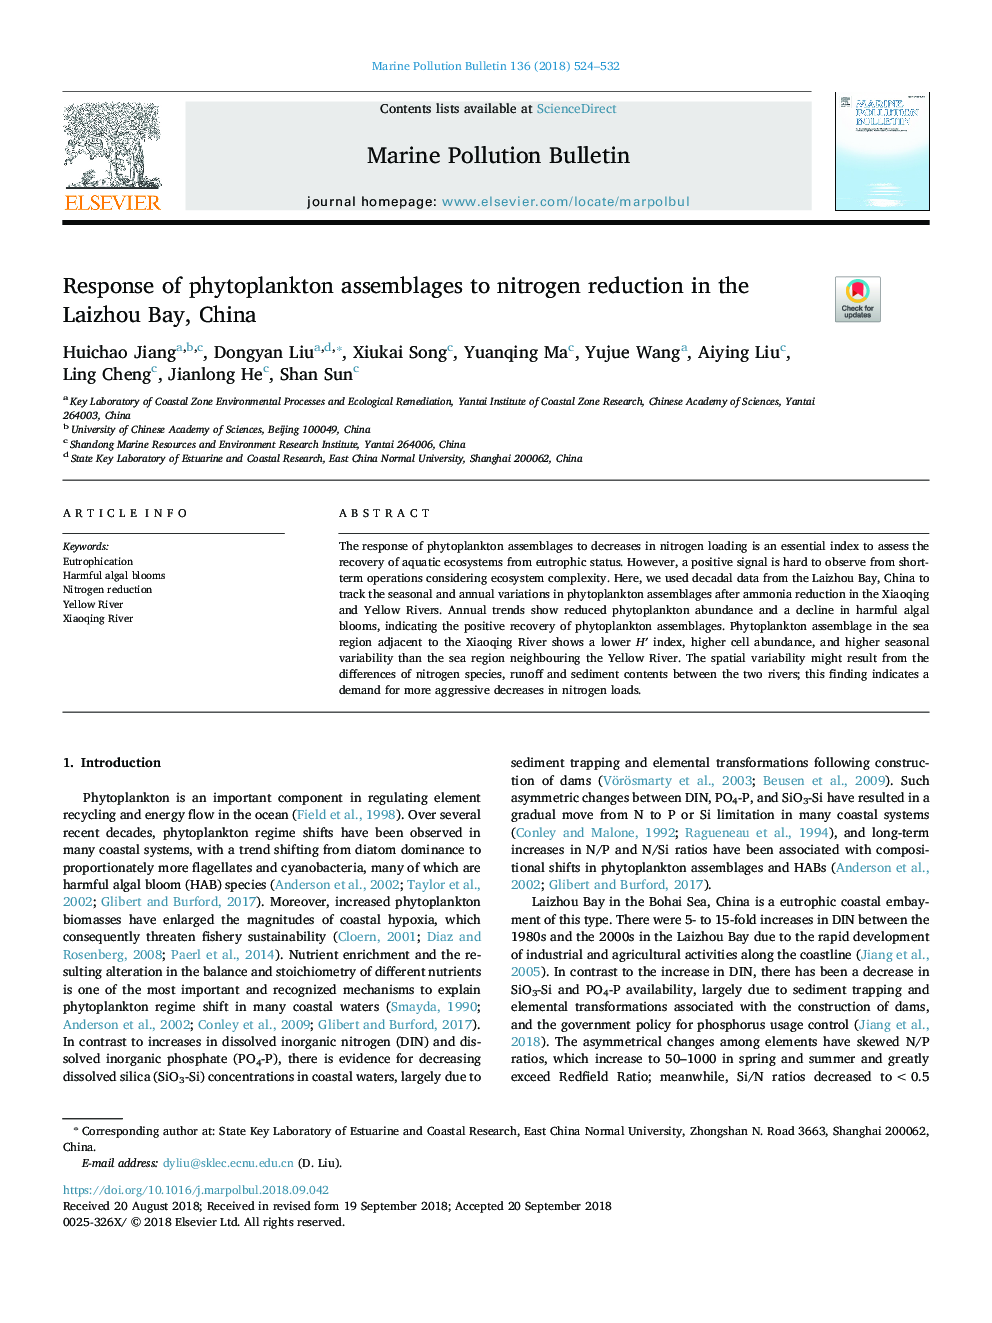 Response of phytoplankton assemblages to nitrogen reduction in the Laizhou Bay, China